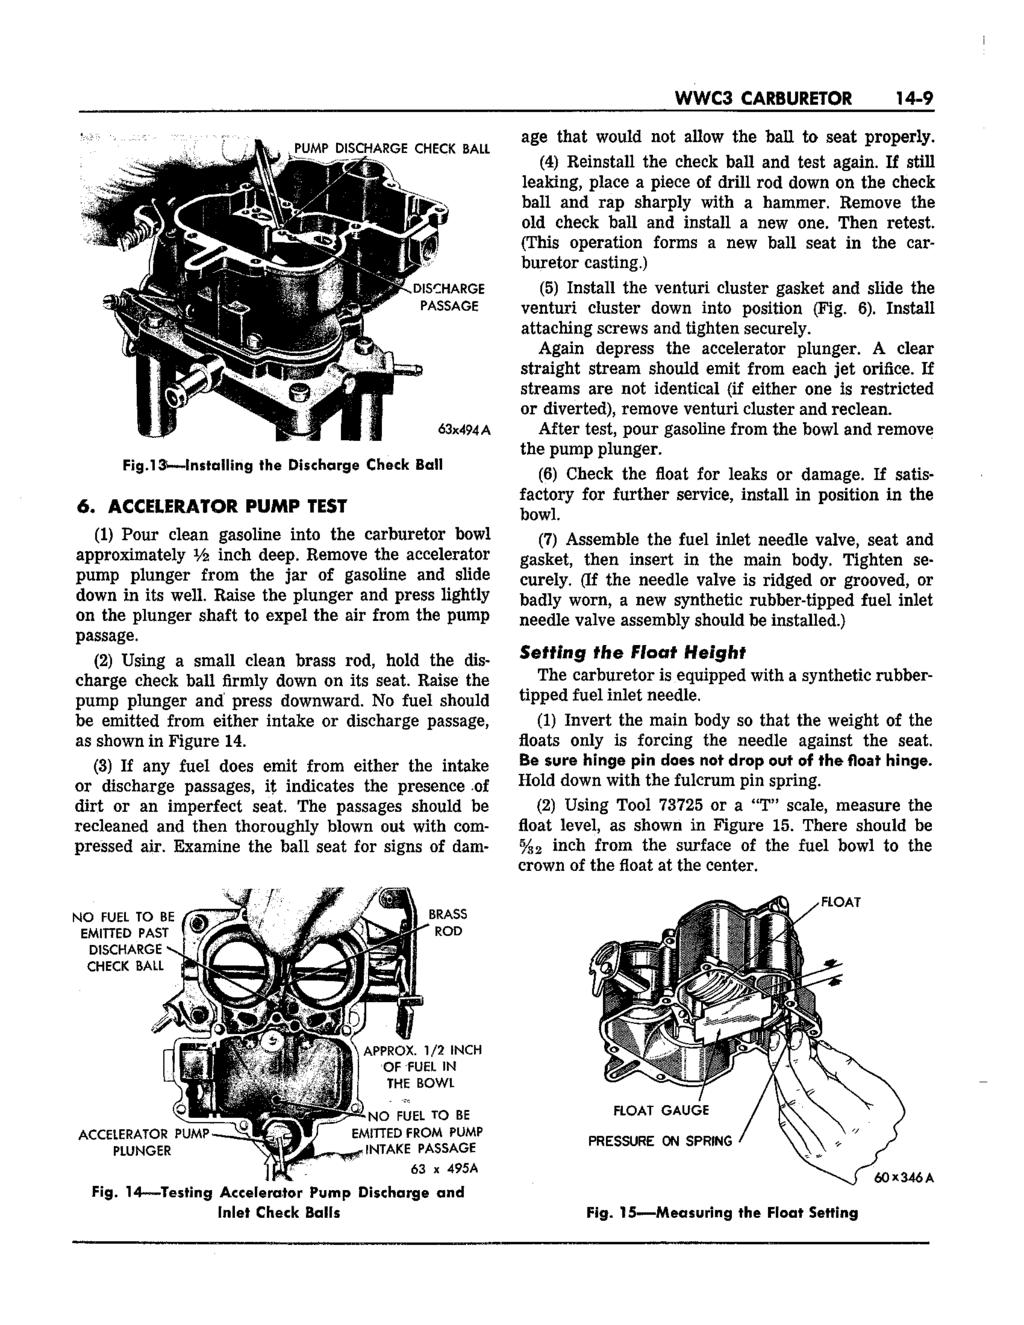 WWC3 CARBURETOR 14-9 Fig.l3< -Installing the Discharge Check Ball 6. ACCELERATOR PUMP TEST (1) Pour clean gasoline into the carburetor bowl approximately V2 inch deep.